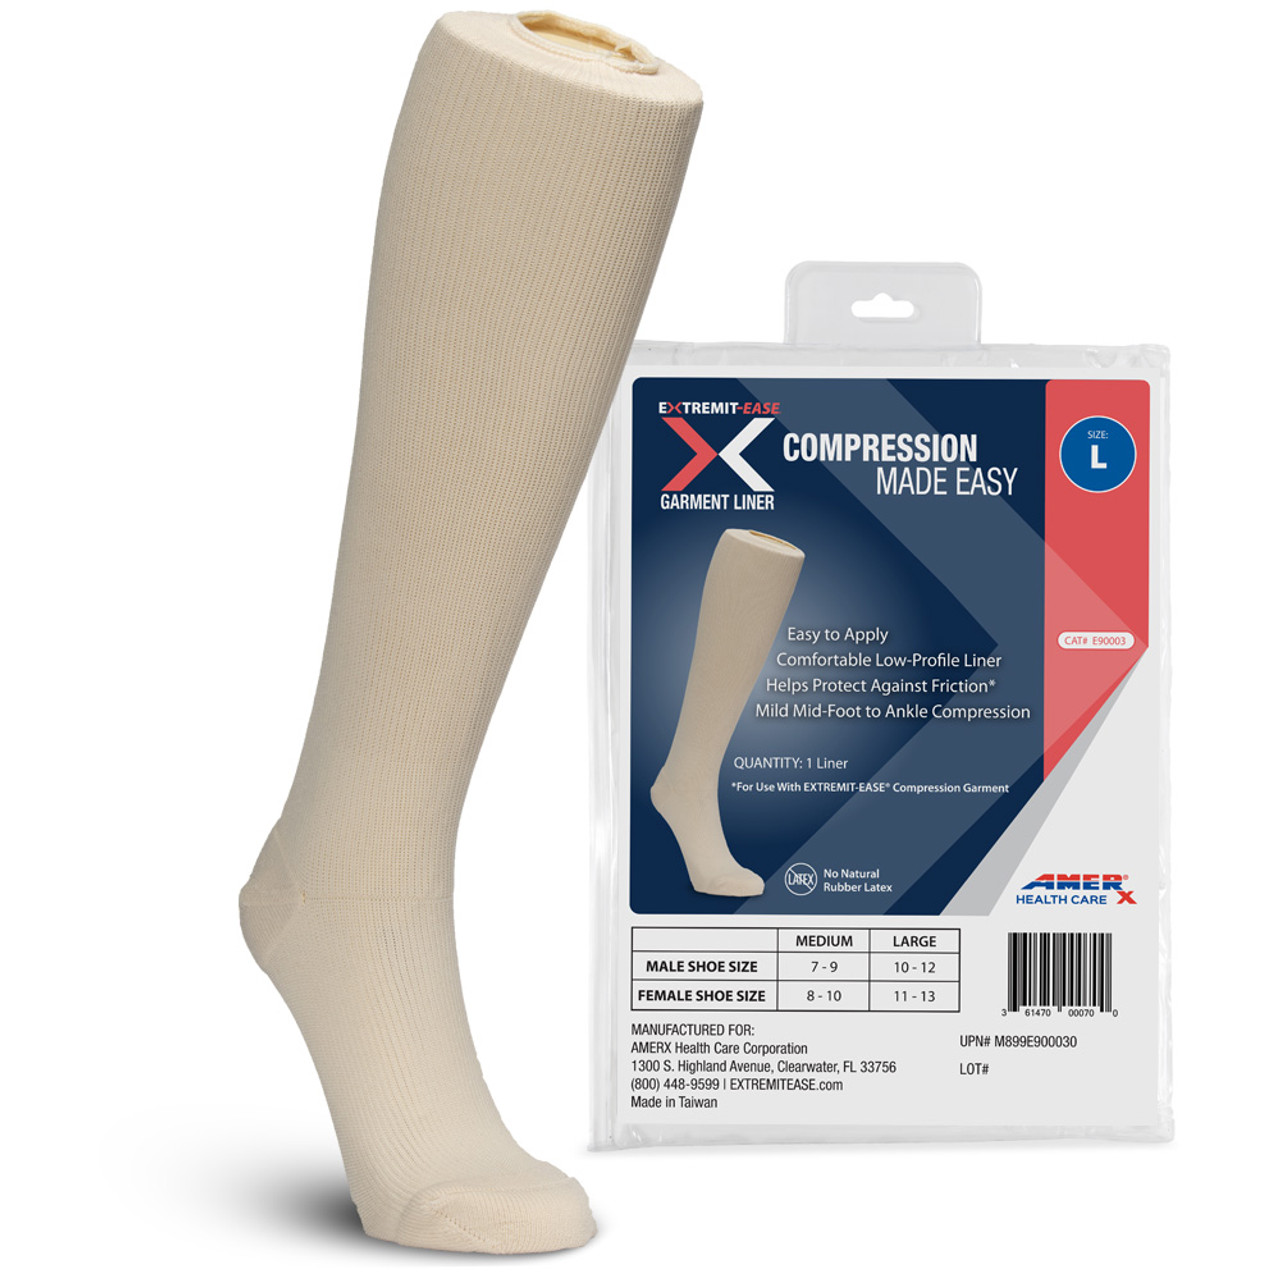 EXTREMIT-EASE Compression Garment - AMERX Health Care